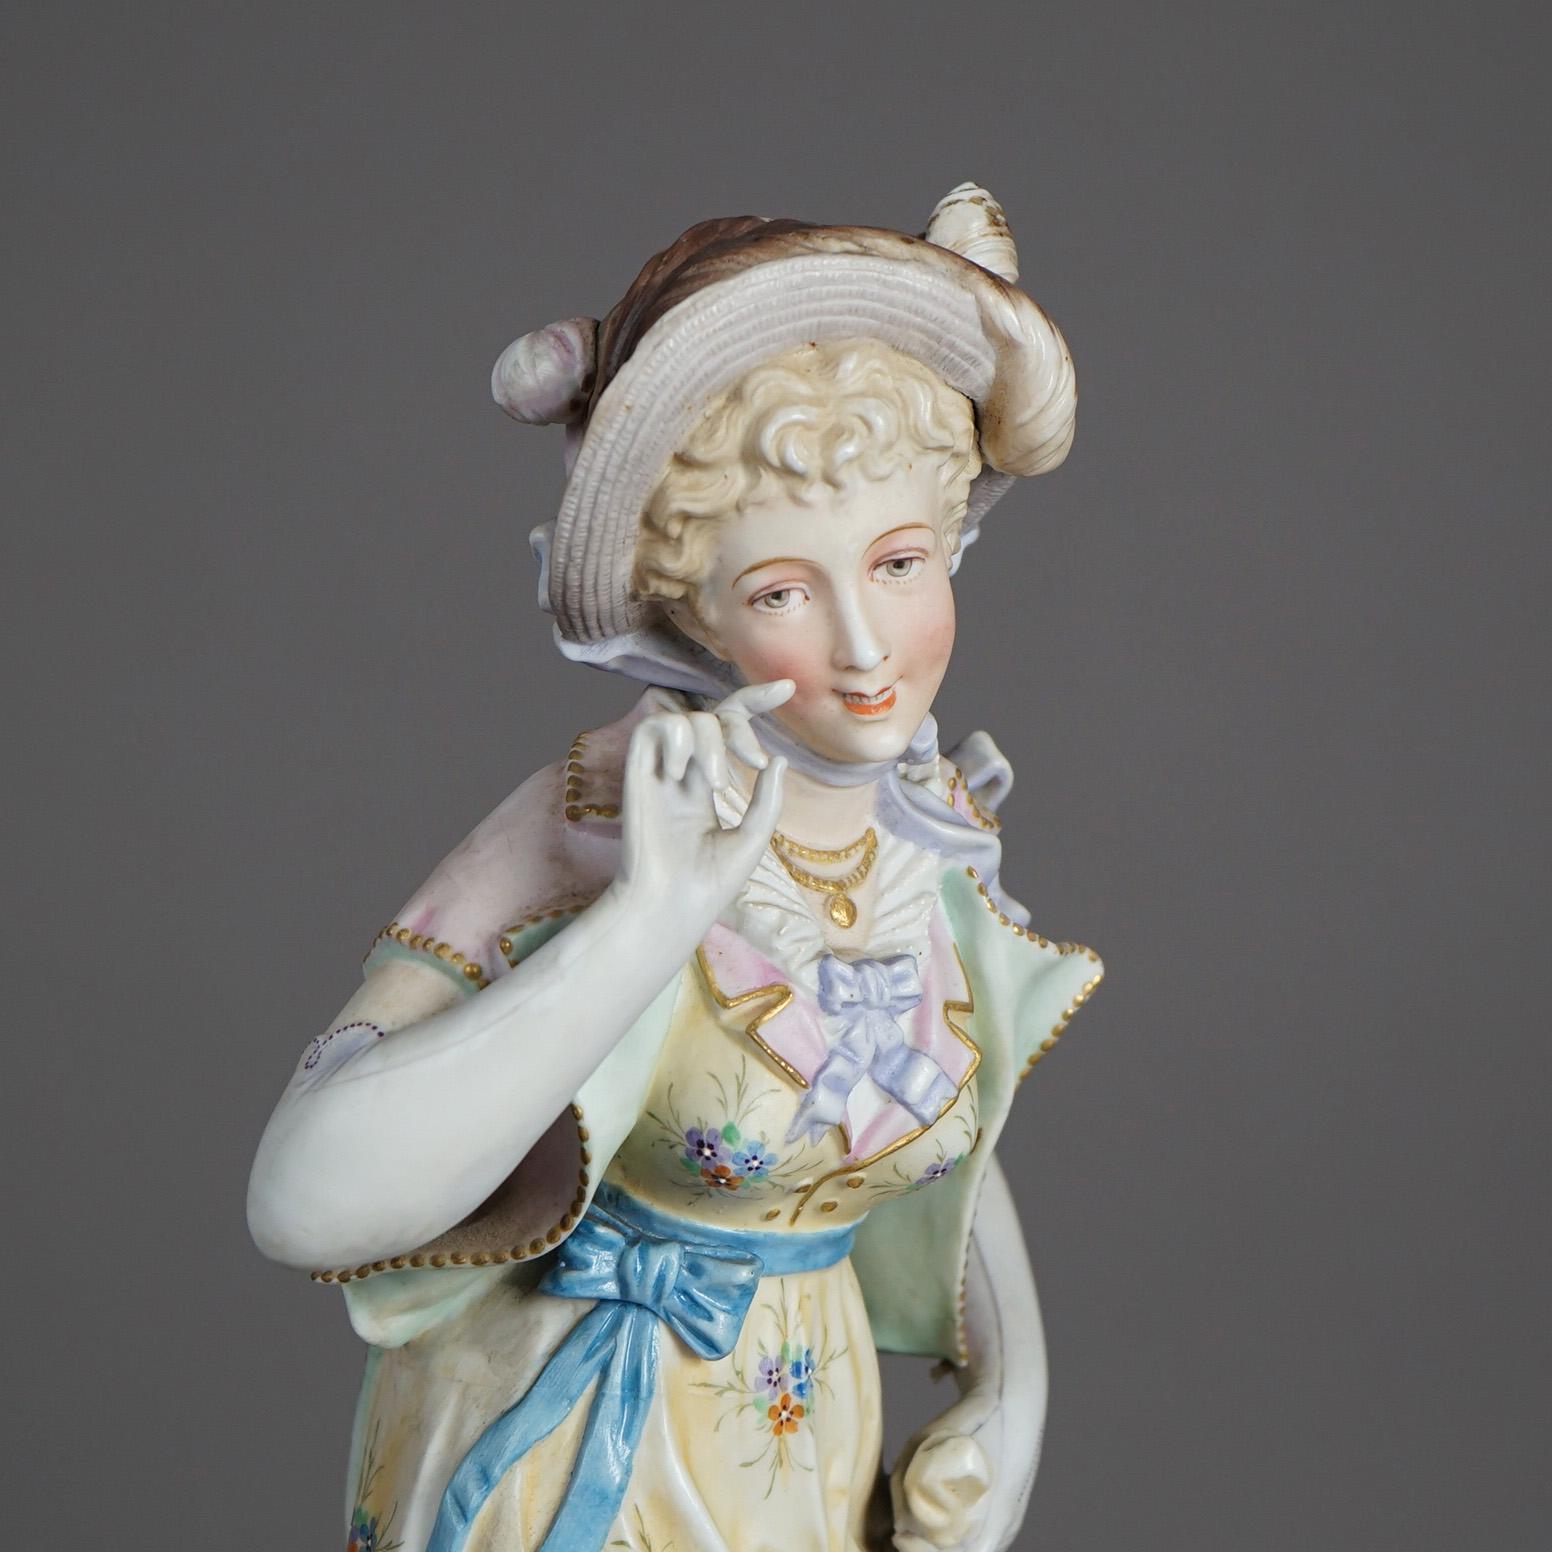 Antique French figure of a woman in the manner of Sevrés offers polychromed and gilt porcelain construction, c1890

Measures- 18''H x 7''W x 7''D